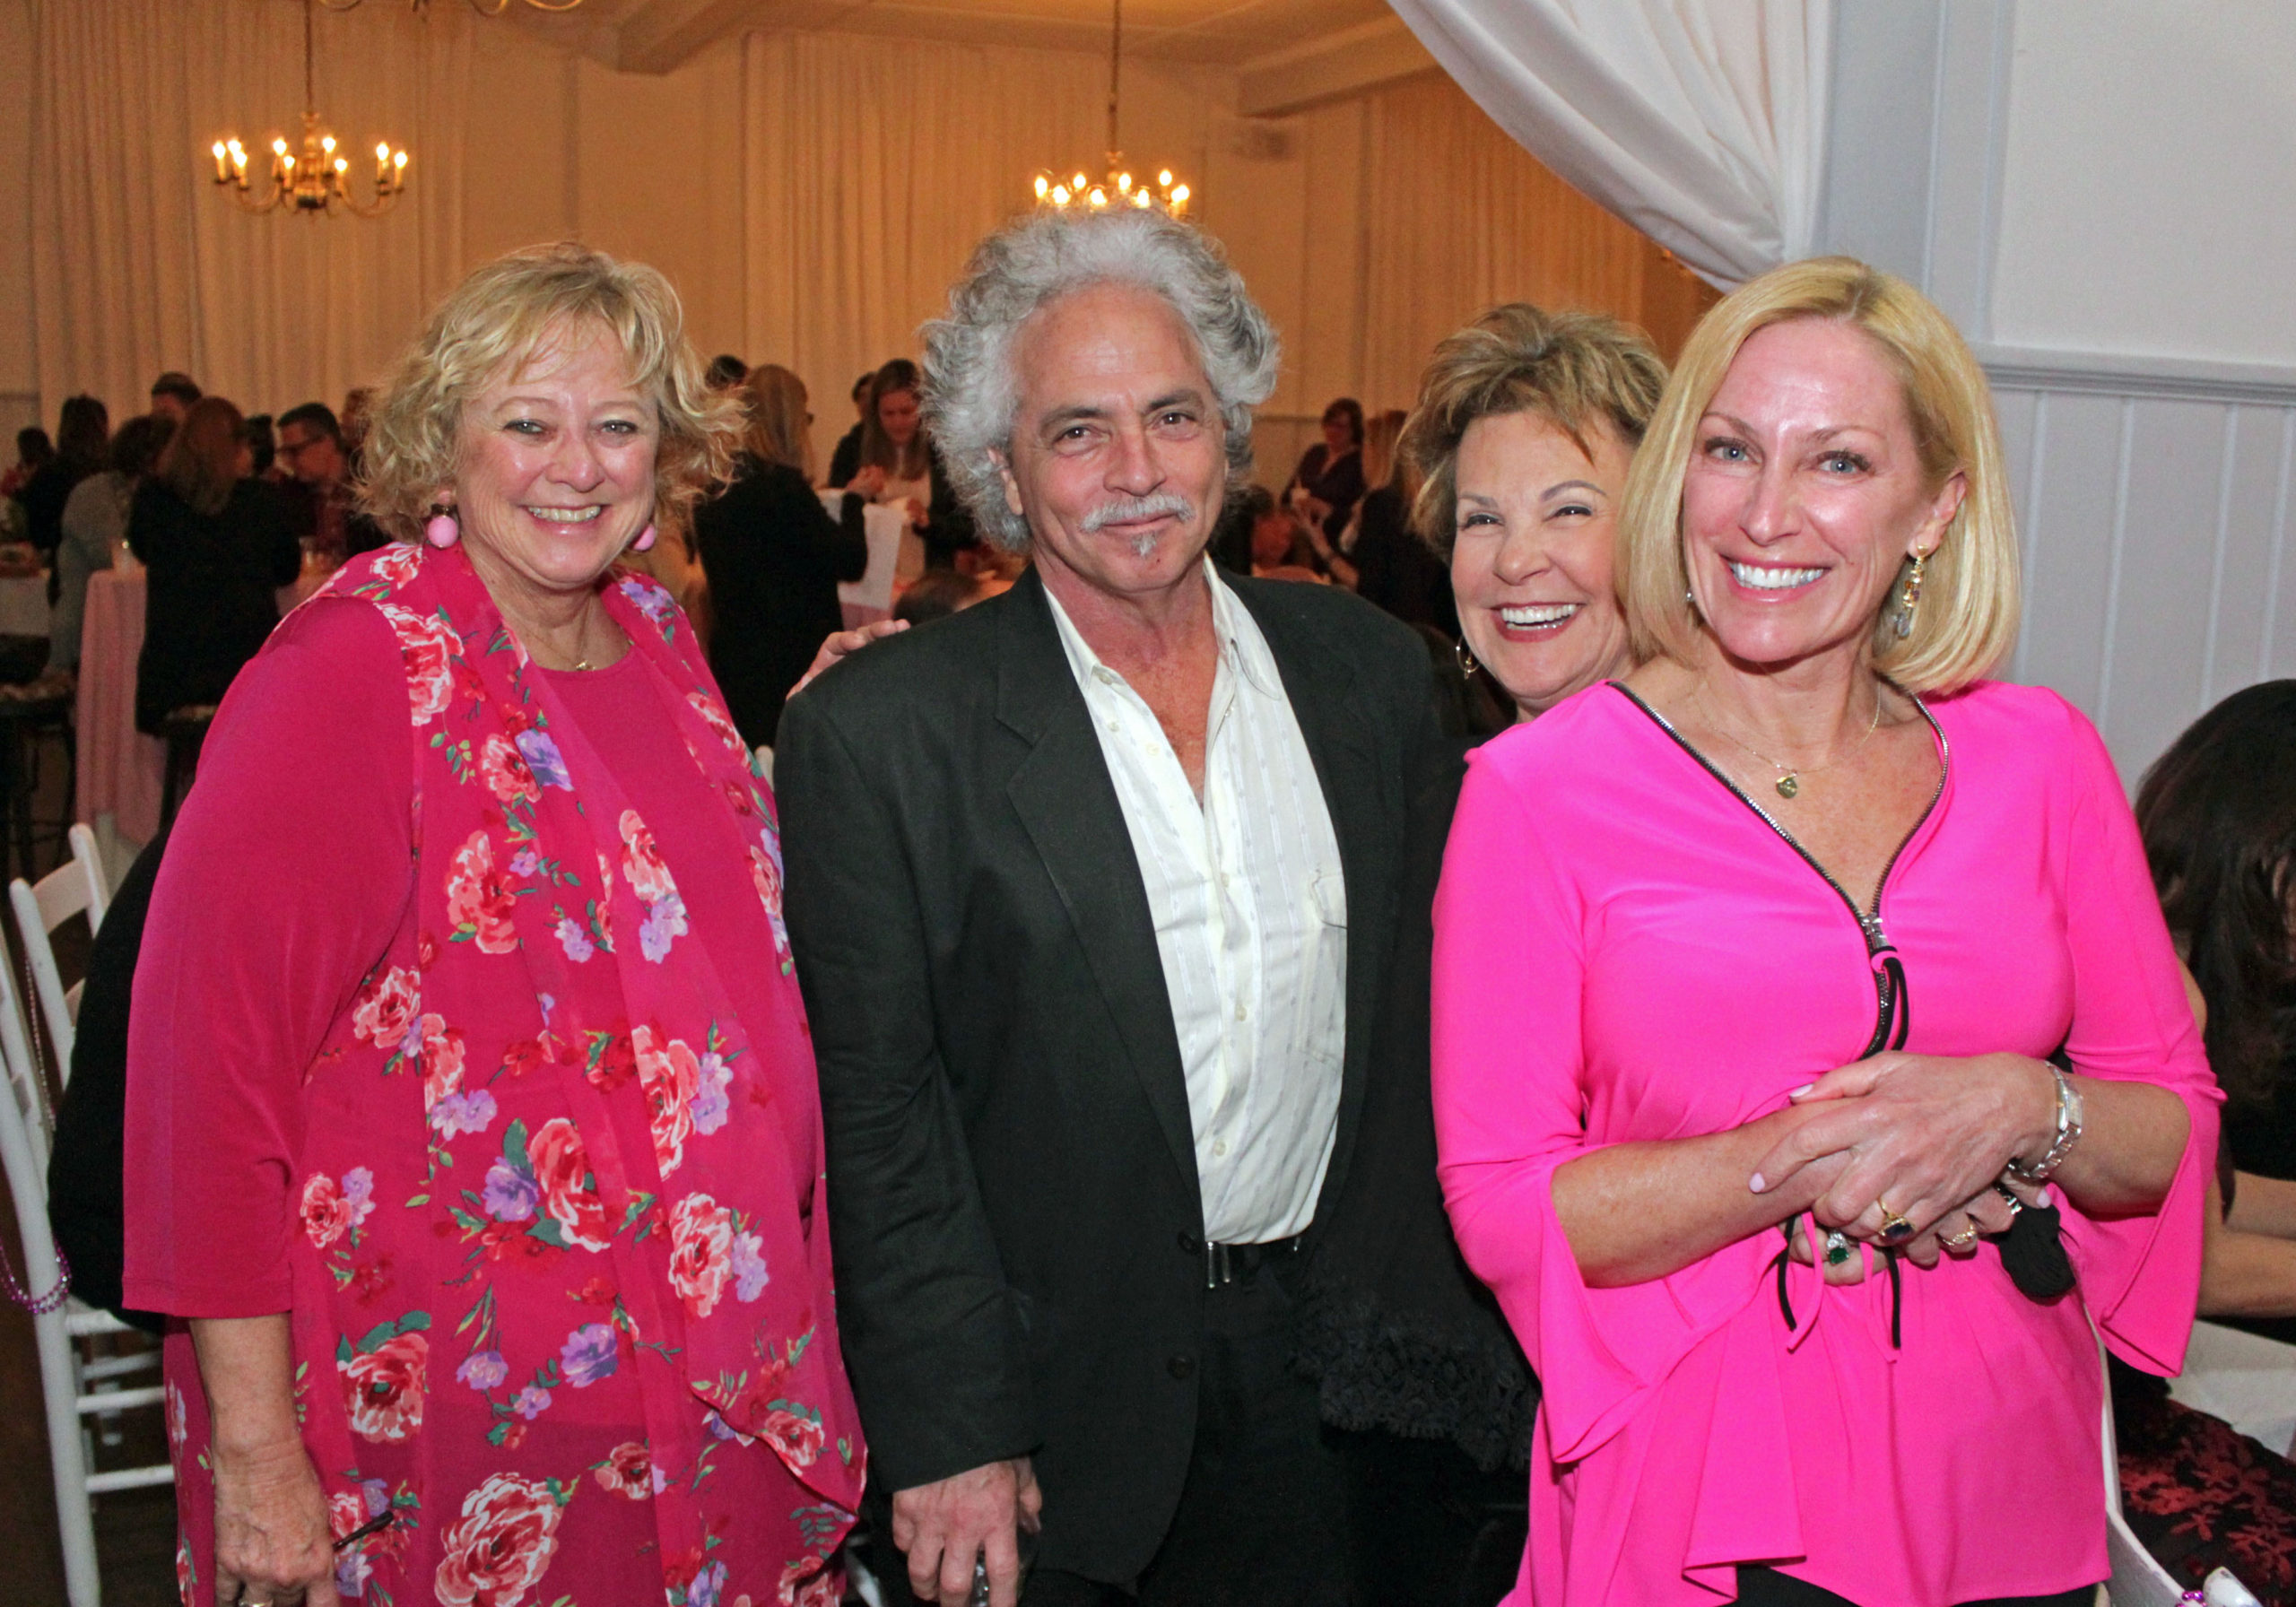 Susie Roden, left,  Russell Blue, Lynn Leff and Stacy Quarty at the “In The Pink” benefit for the Ellen Hermanson Breast Center at Stony Brook Southampton Hospital and Ellen’s Well in April 2019.